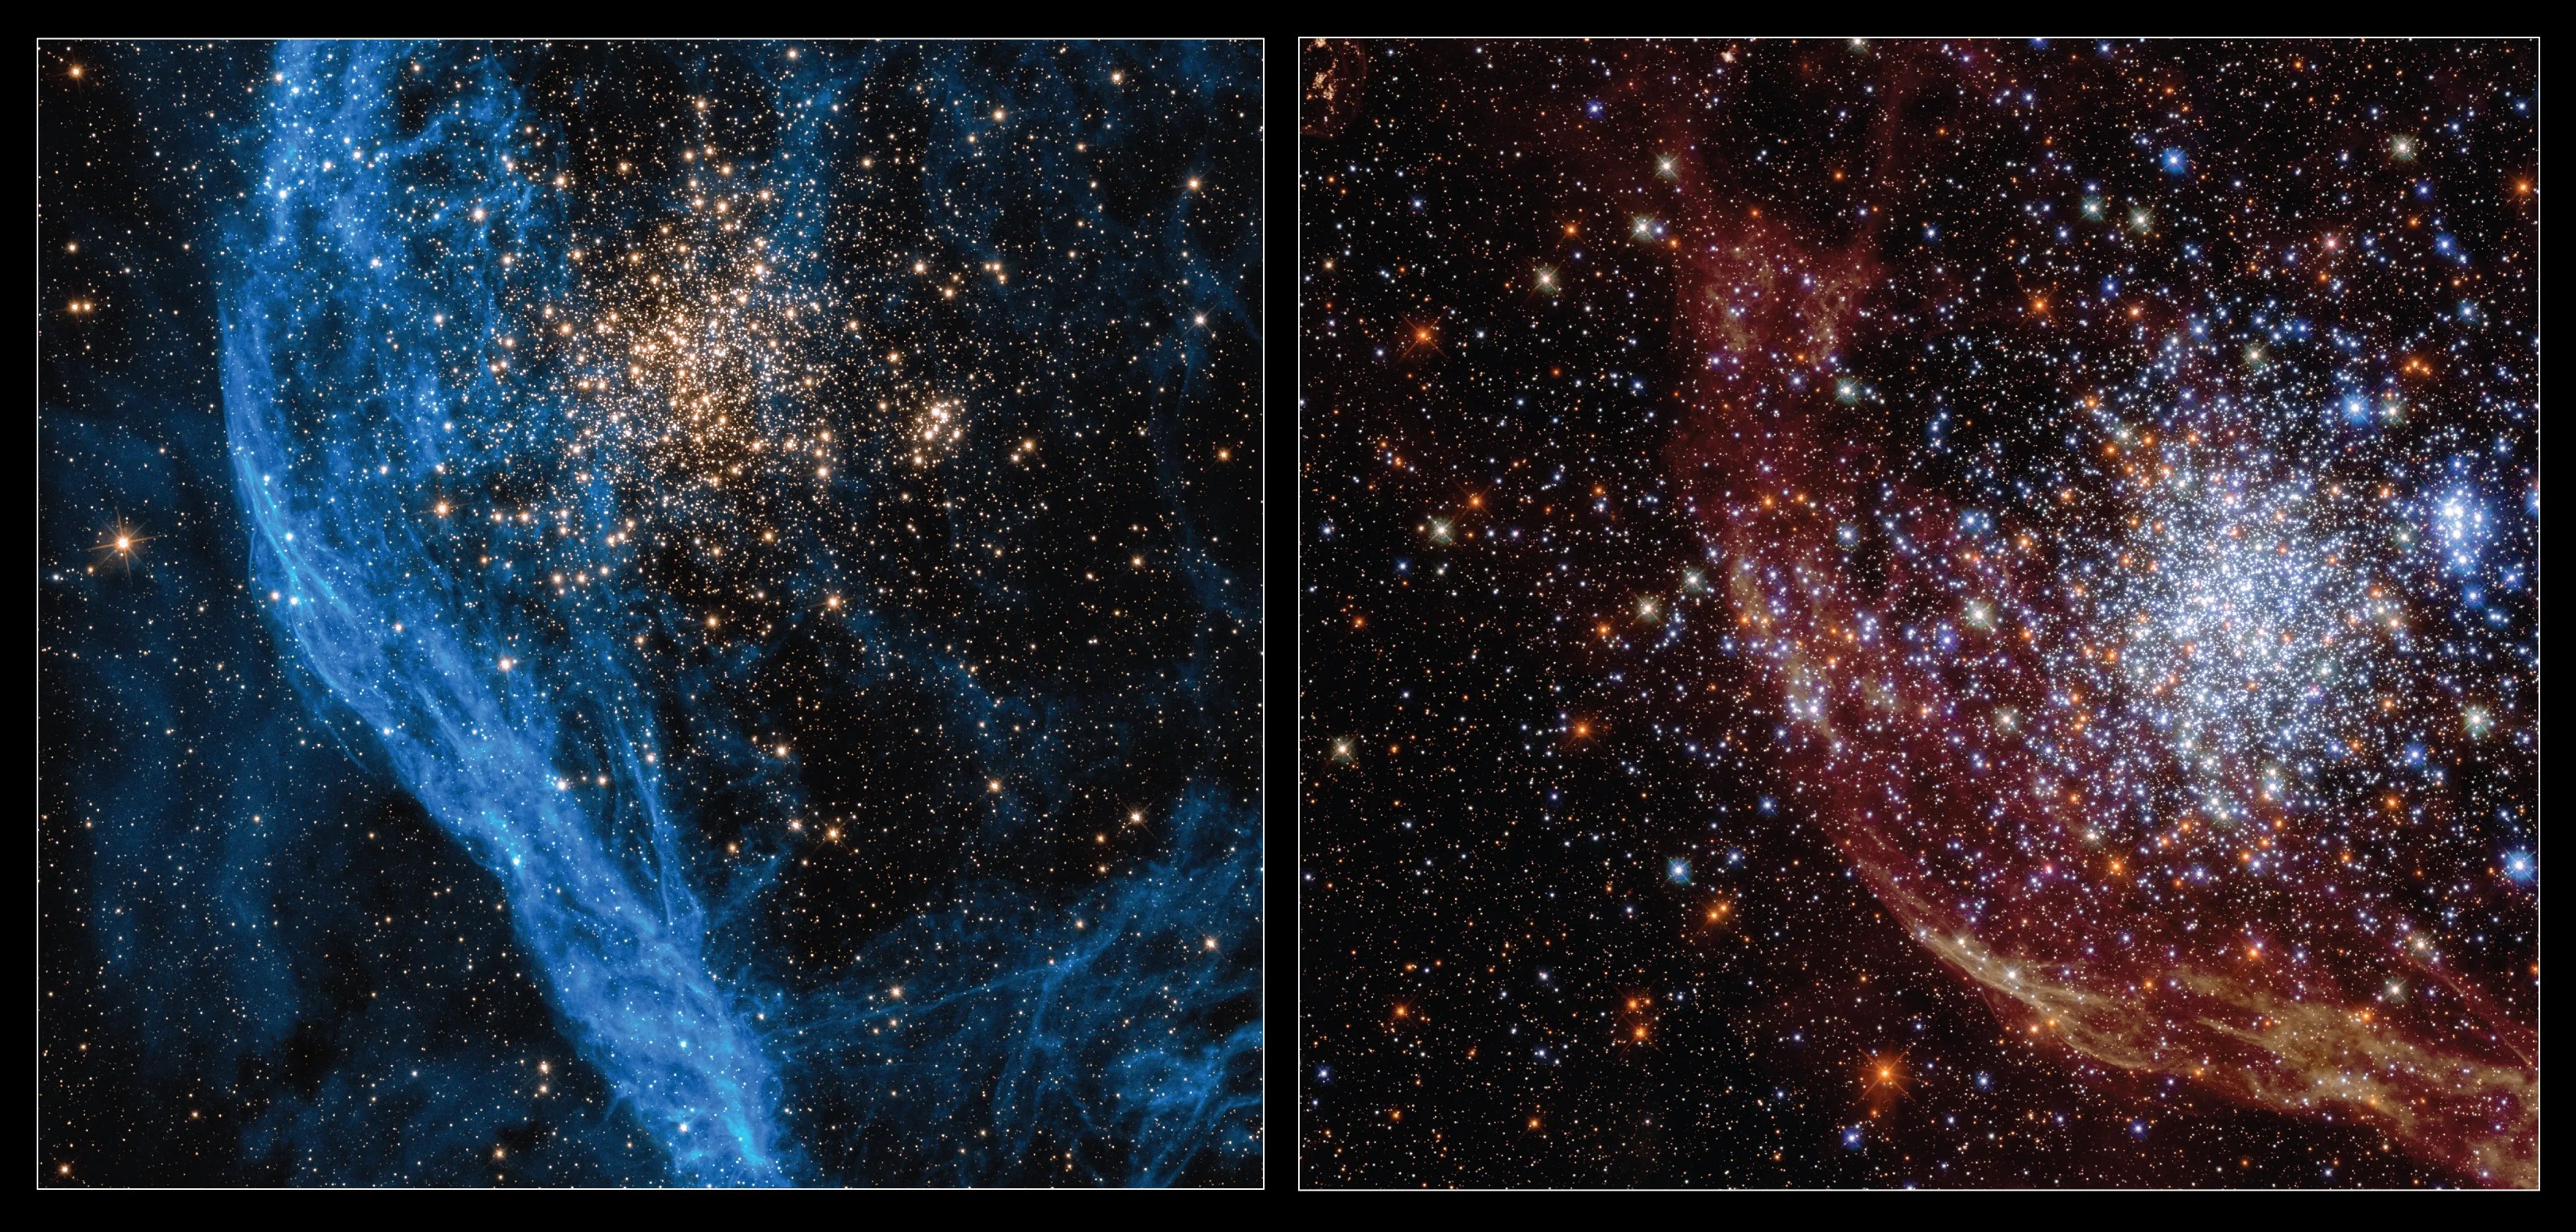 Left: nearly spherical gathering of white stars at center top. blue gas cloud extends from top left to center bottom.
right: center left spherical gathering of blue-white and orange stars, reddish gas cloud extends from bottom right corner to top center.